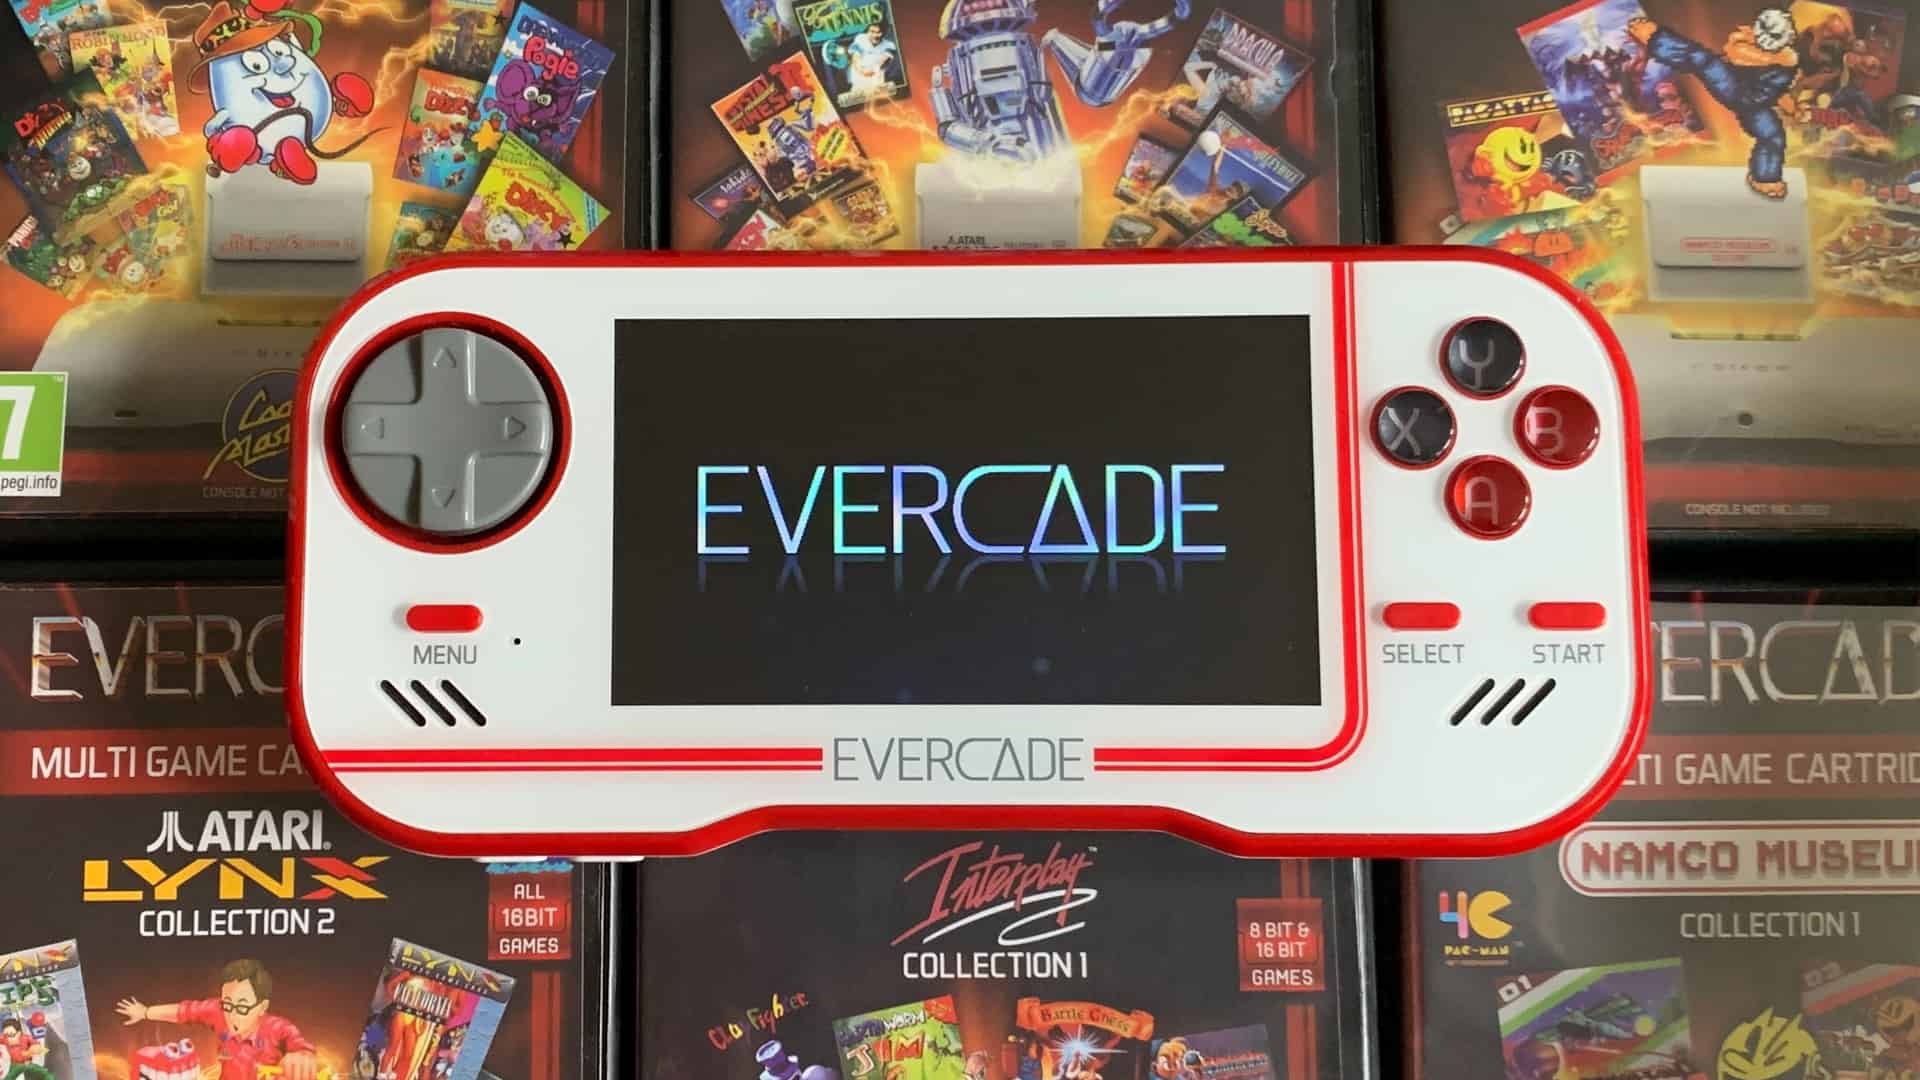 Is an Evercade any good for racing games?